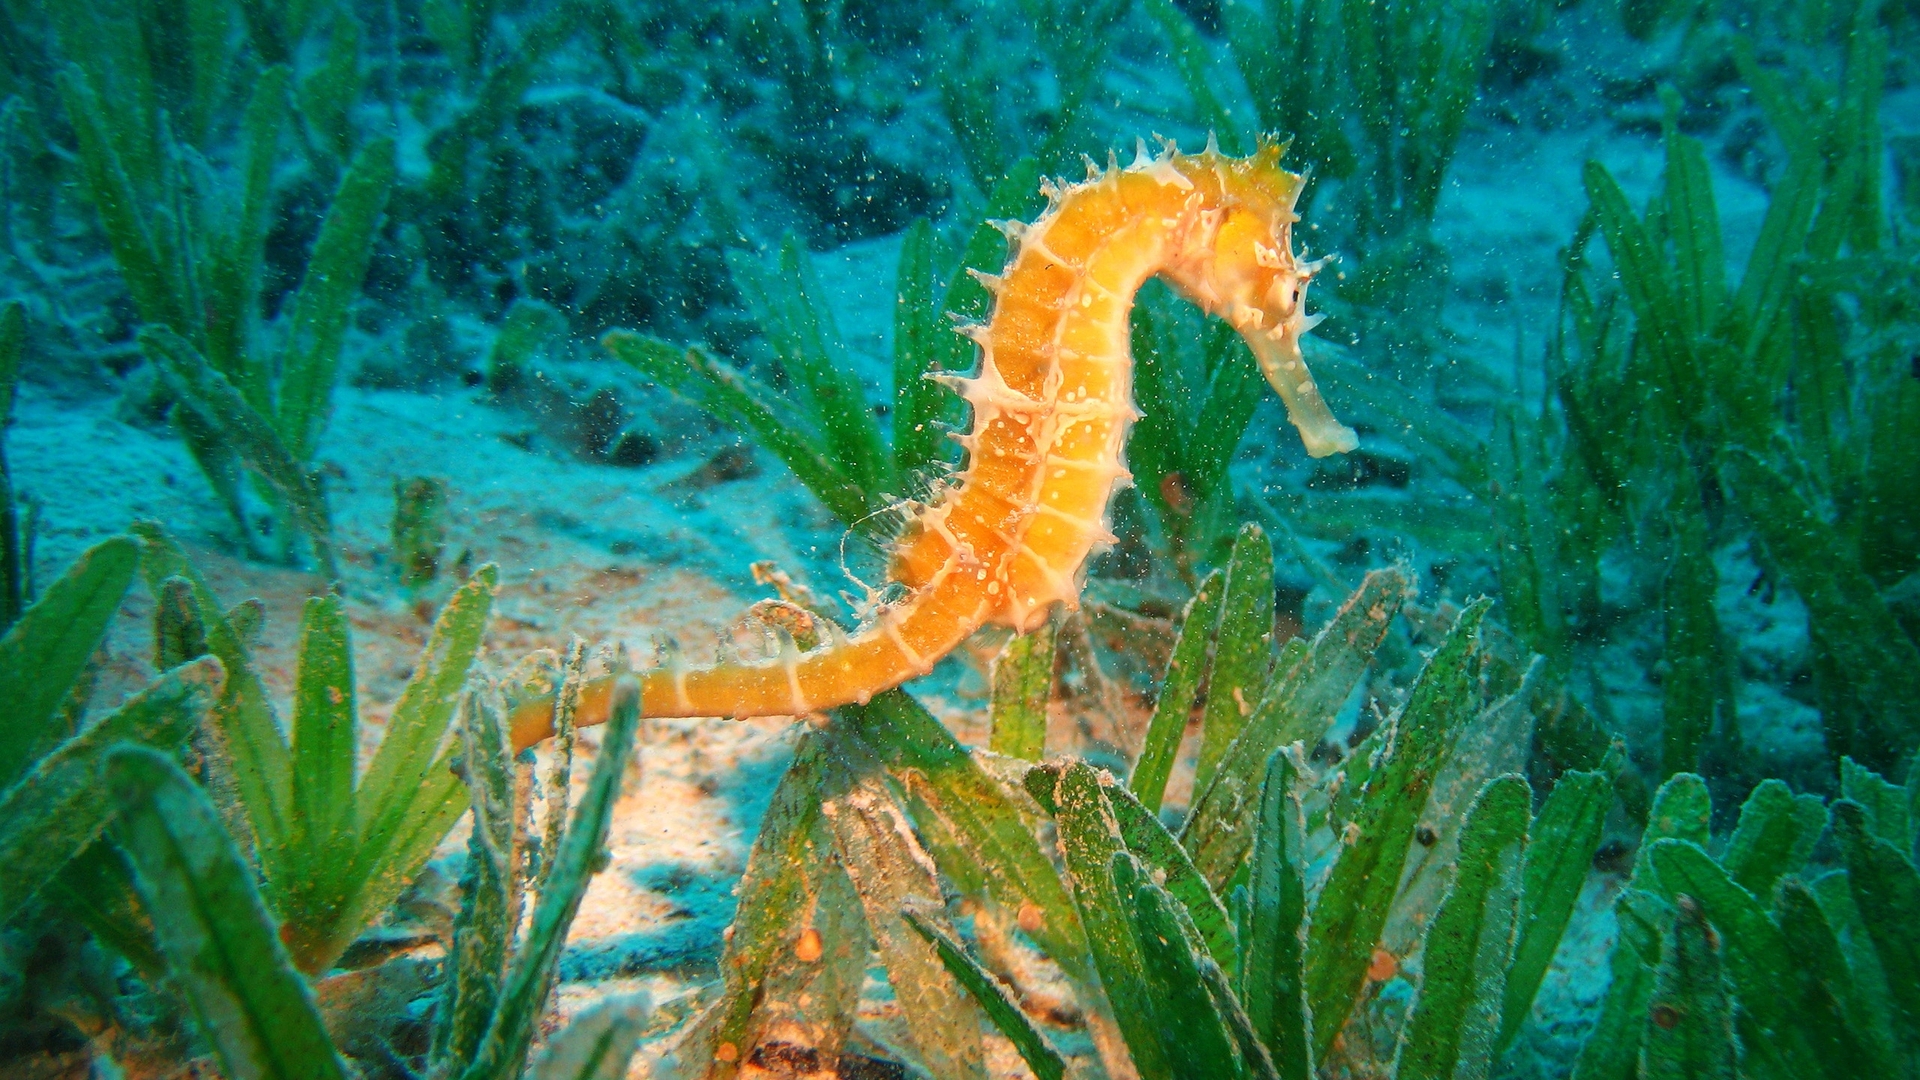 Seahorse In A Dirty Fish Tank Widescreen Wallpaper